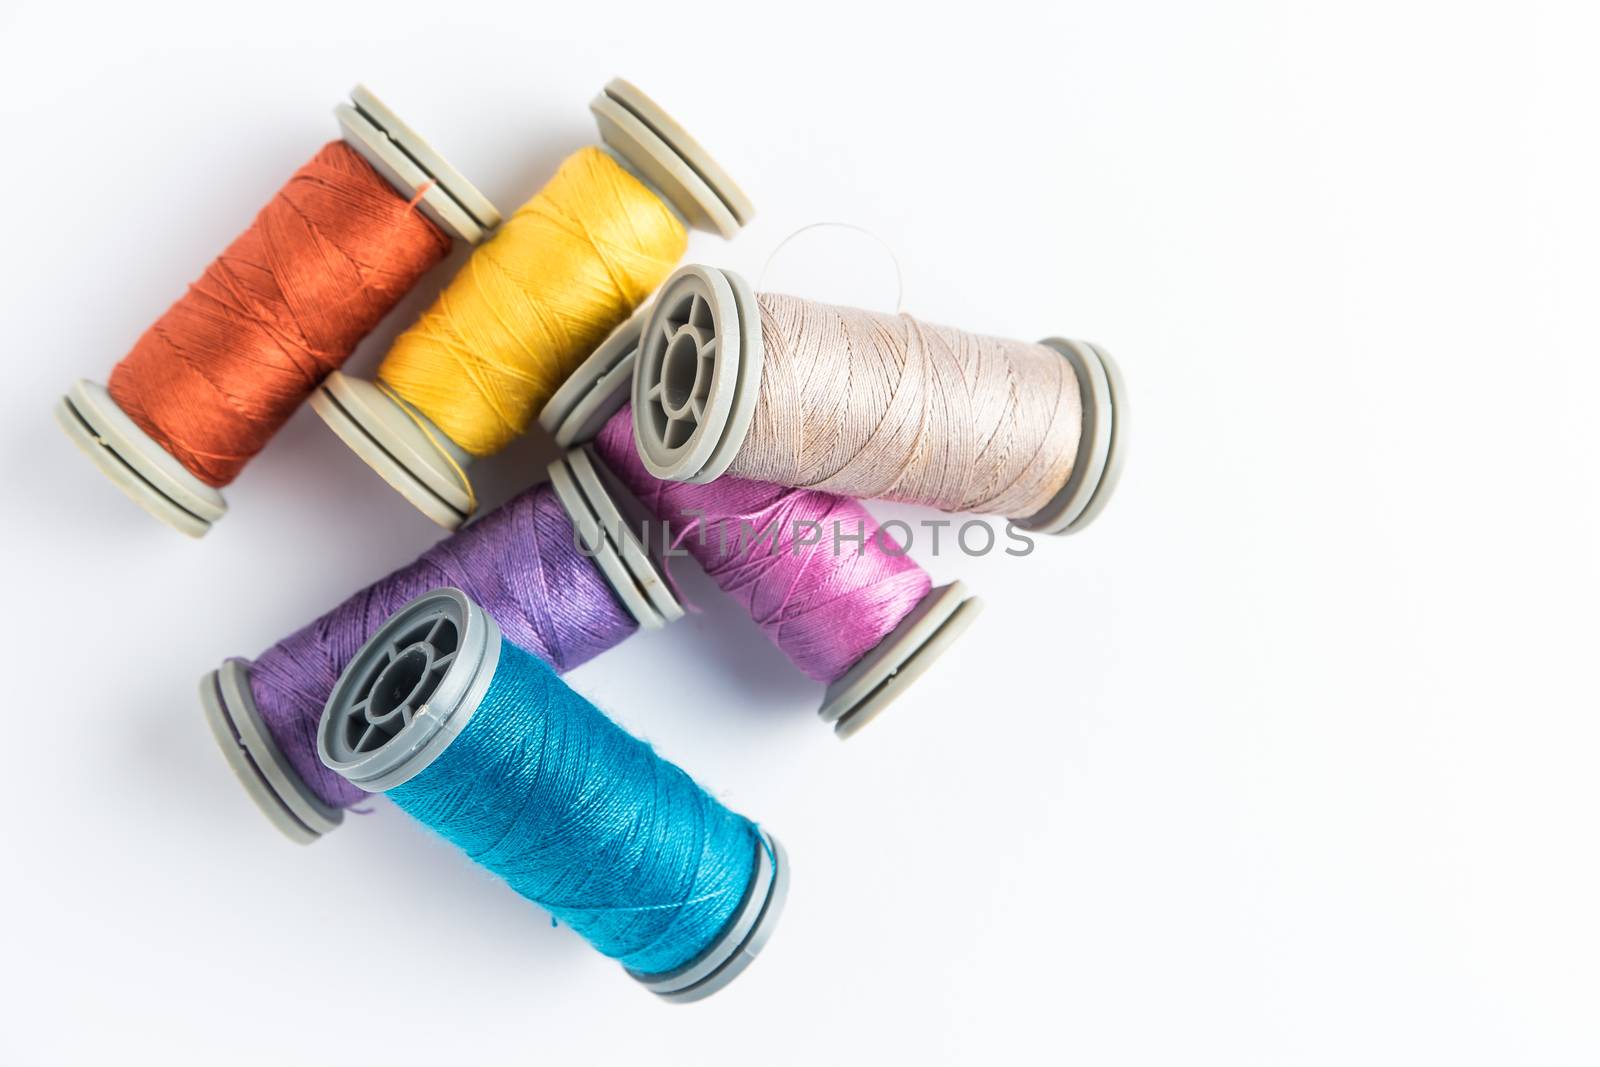 Multi-colored threads by AnaMarques